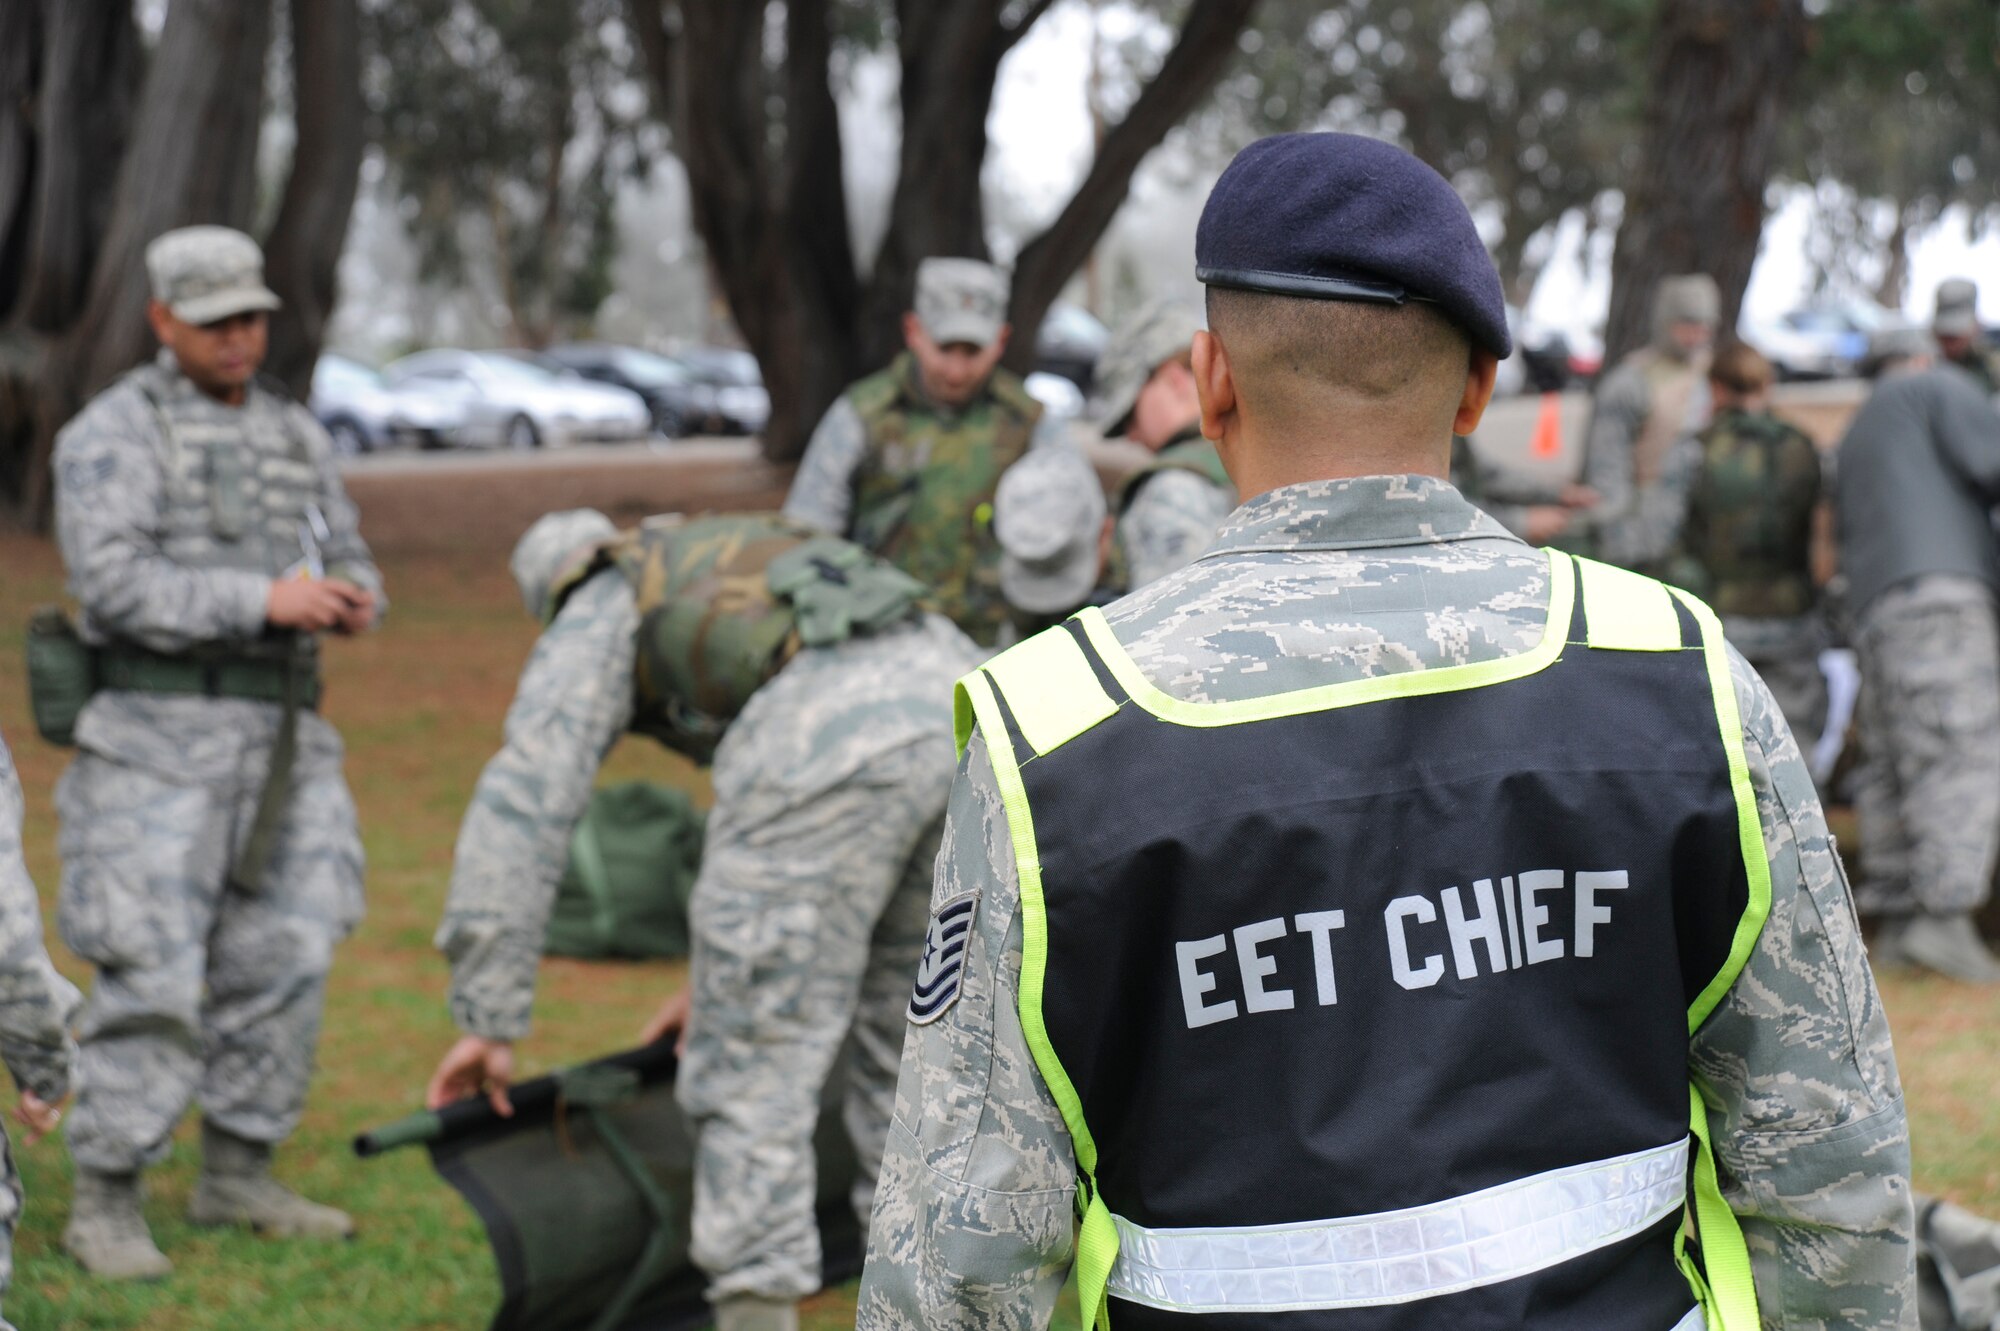 VANDENBERG AIR FORCE BASE, Calif. --
An Exercise Evaluation Team member observes Airmen training at a Self-Aid and Buddy Care station during deployment readiness training at Cocheo Park Thursday, Nov. 1, 2012. EET members provide oversight and feedback to ensure proper training procedures are being followed for deployment readiness. (U.S. Air Force photo/Michael Peterson)